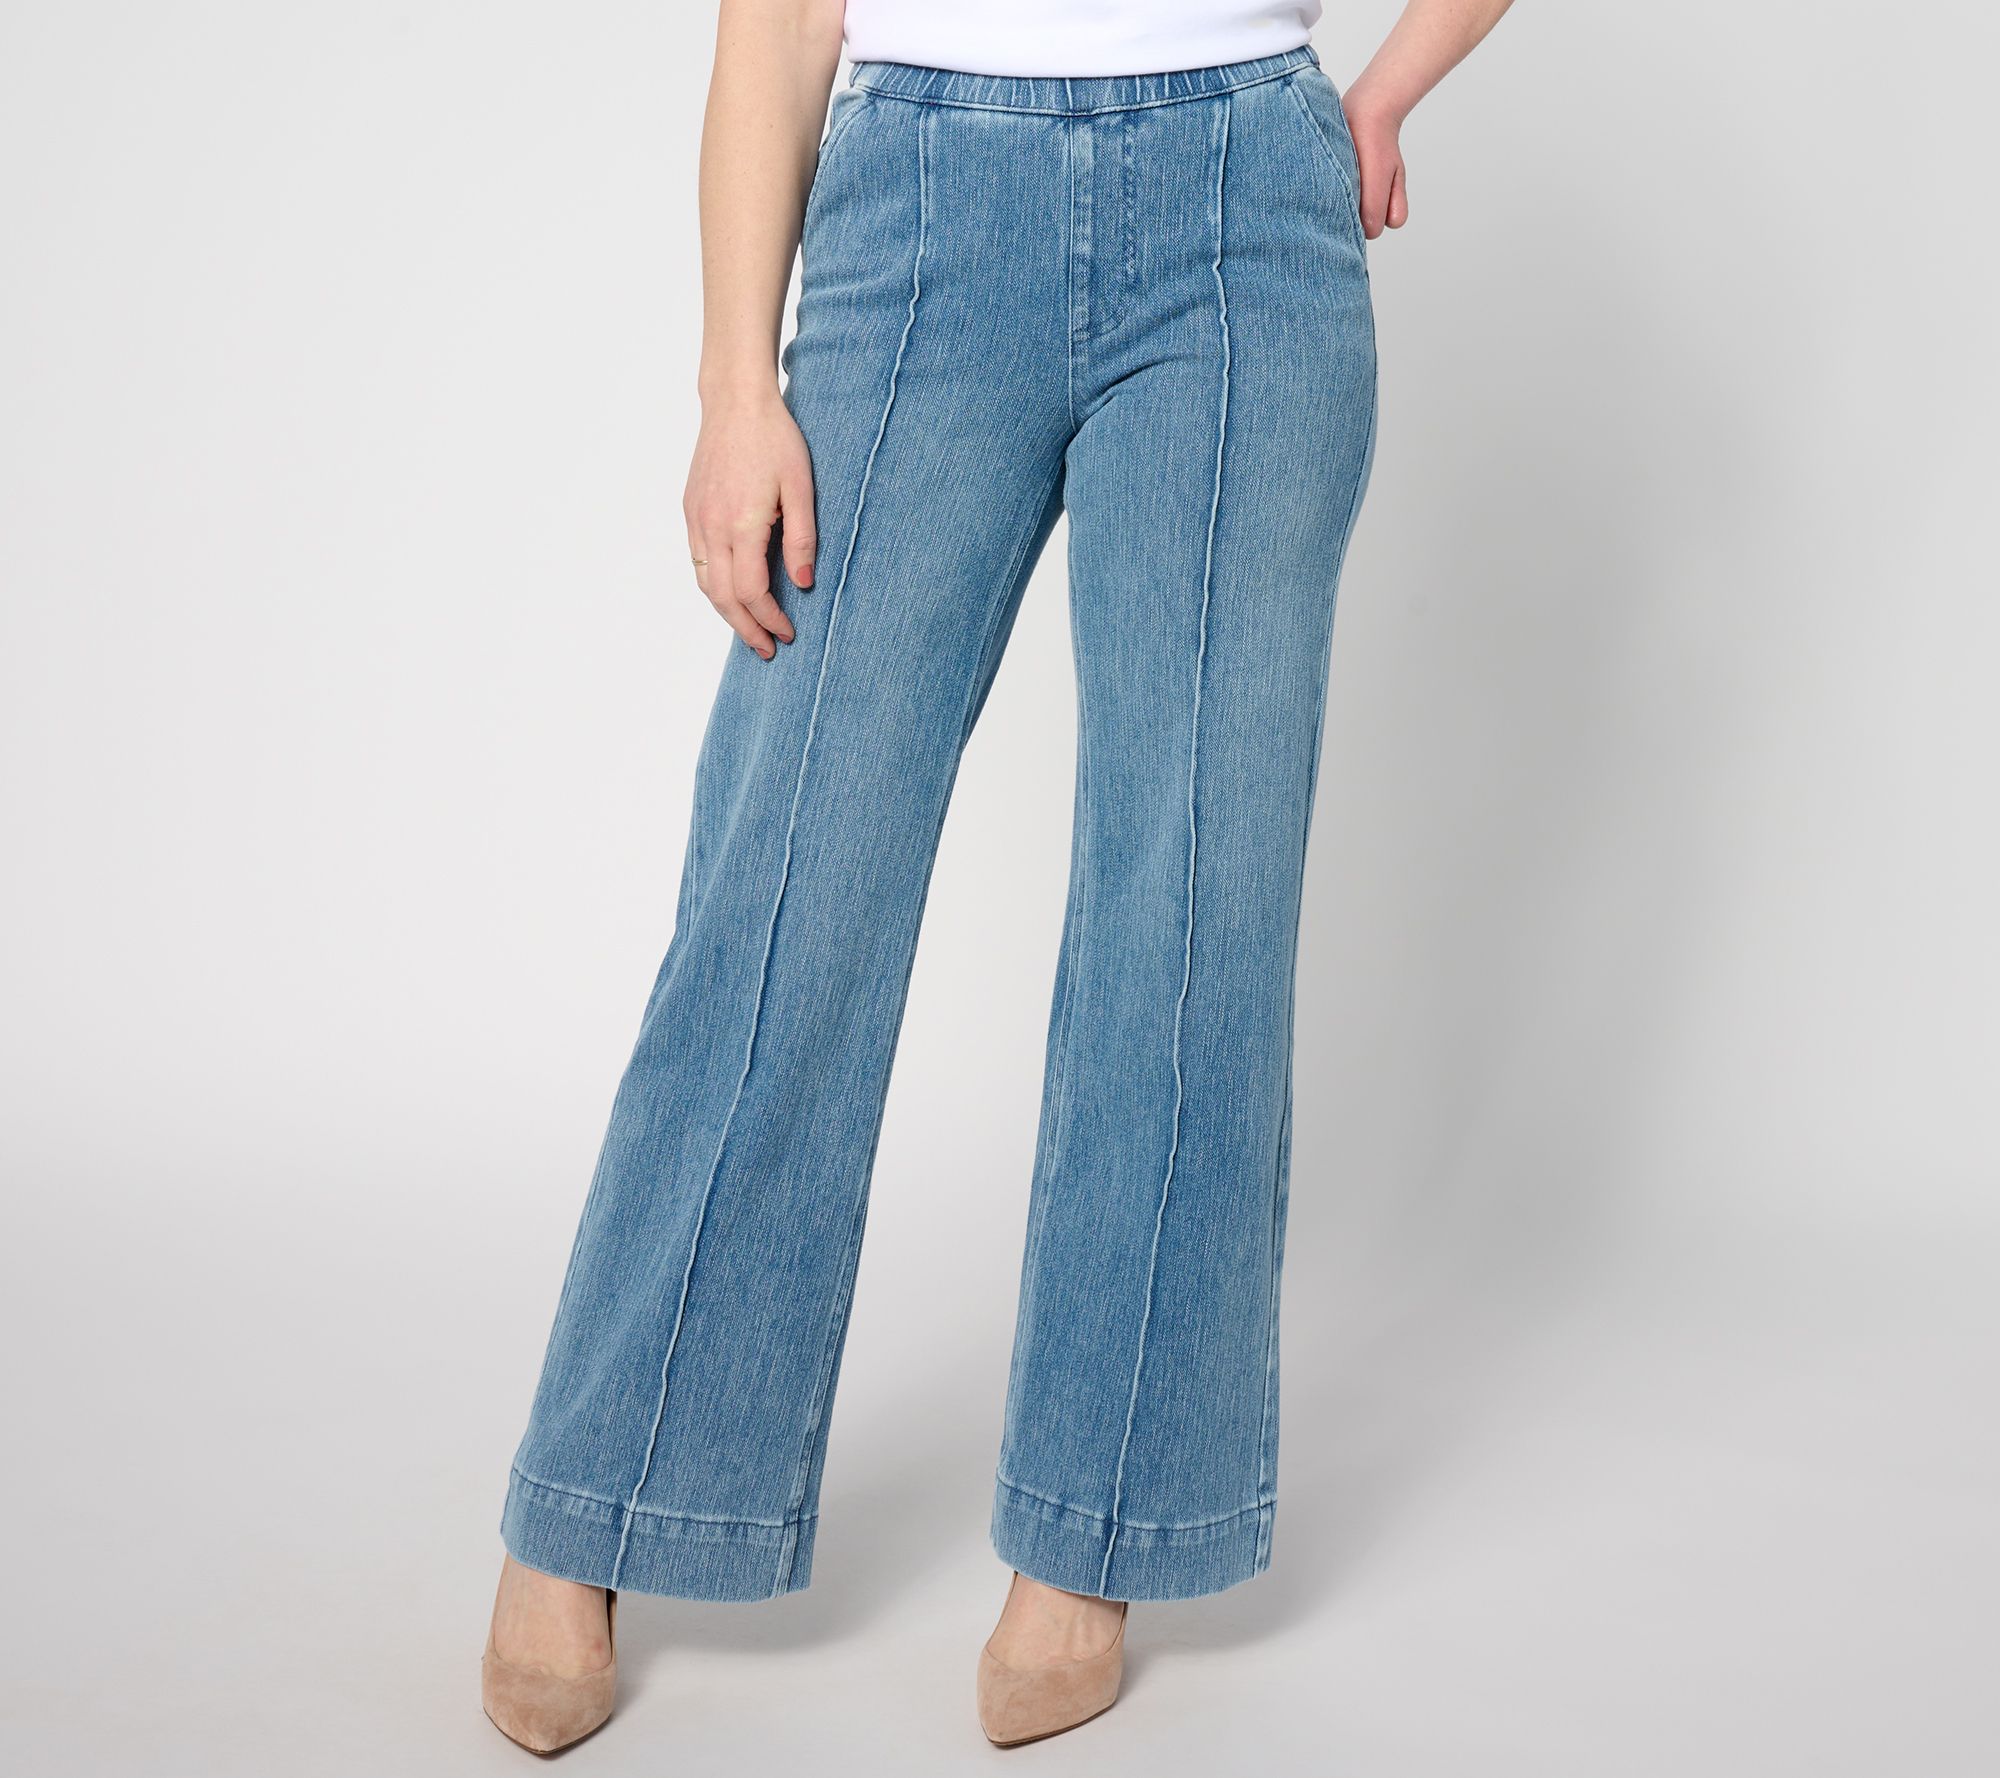 Would you travel in long-haul jeans? These £175 stretchy Palazzo